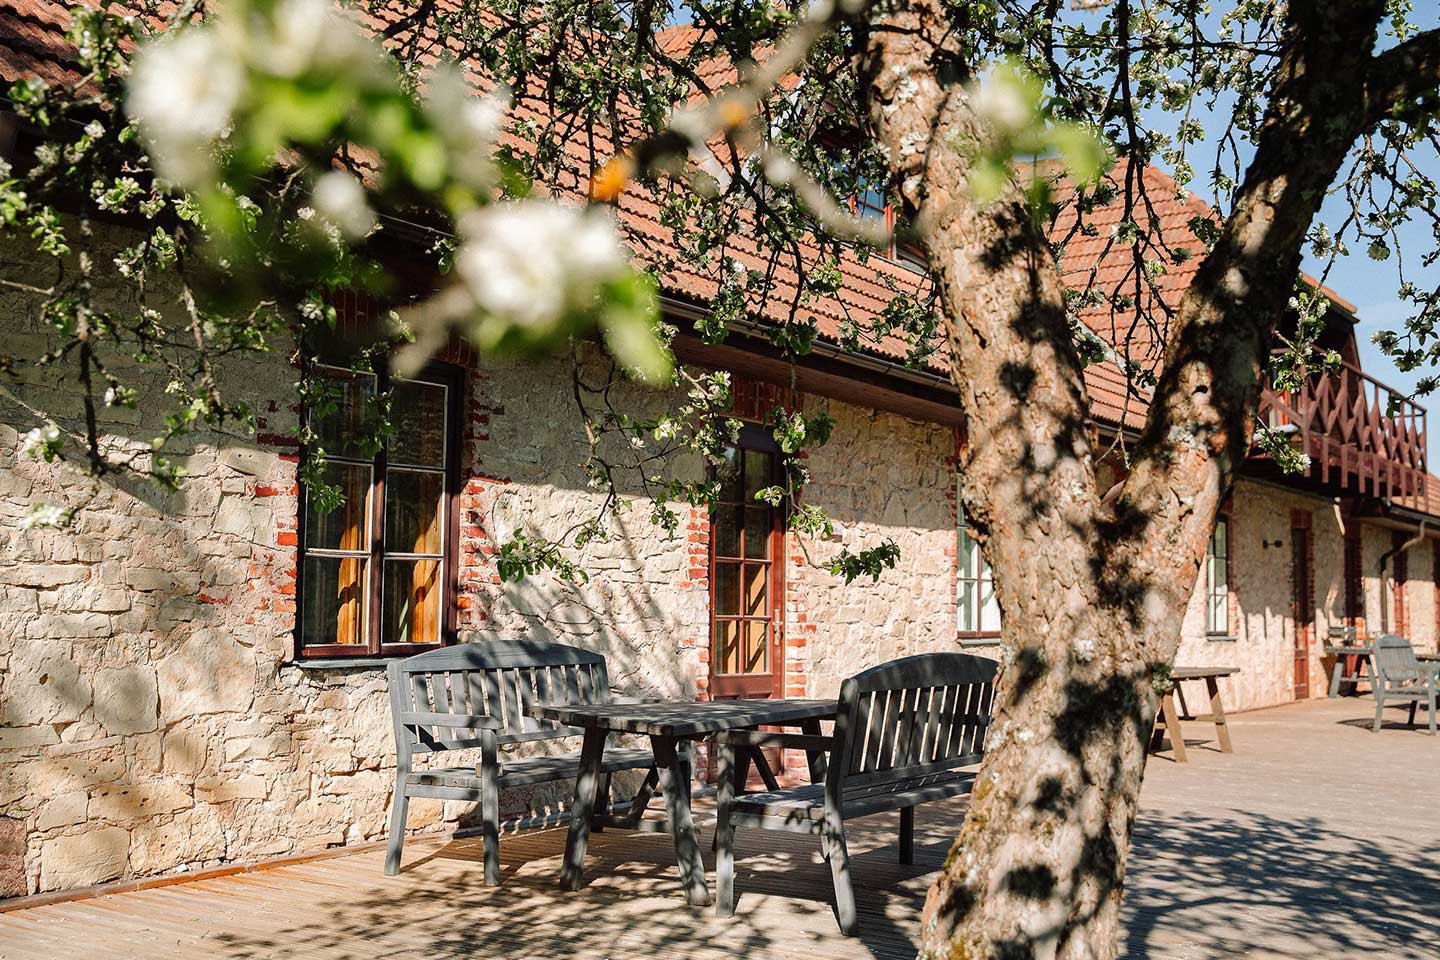 Cesis, Karlamuiza Country Hotel